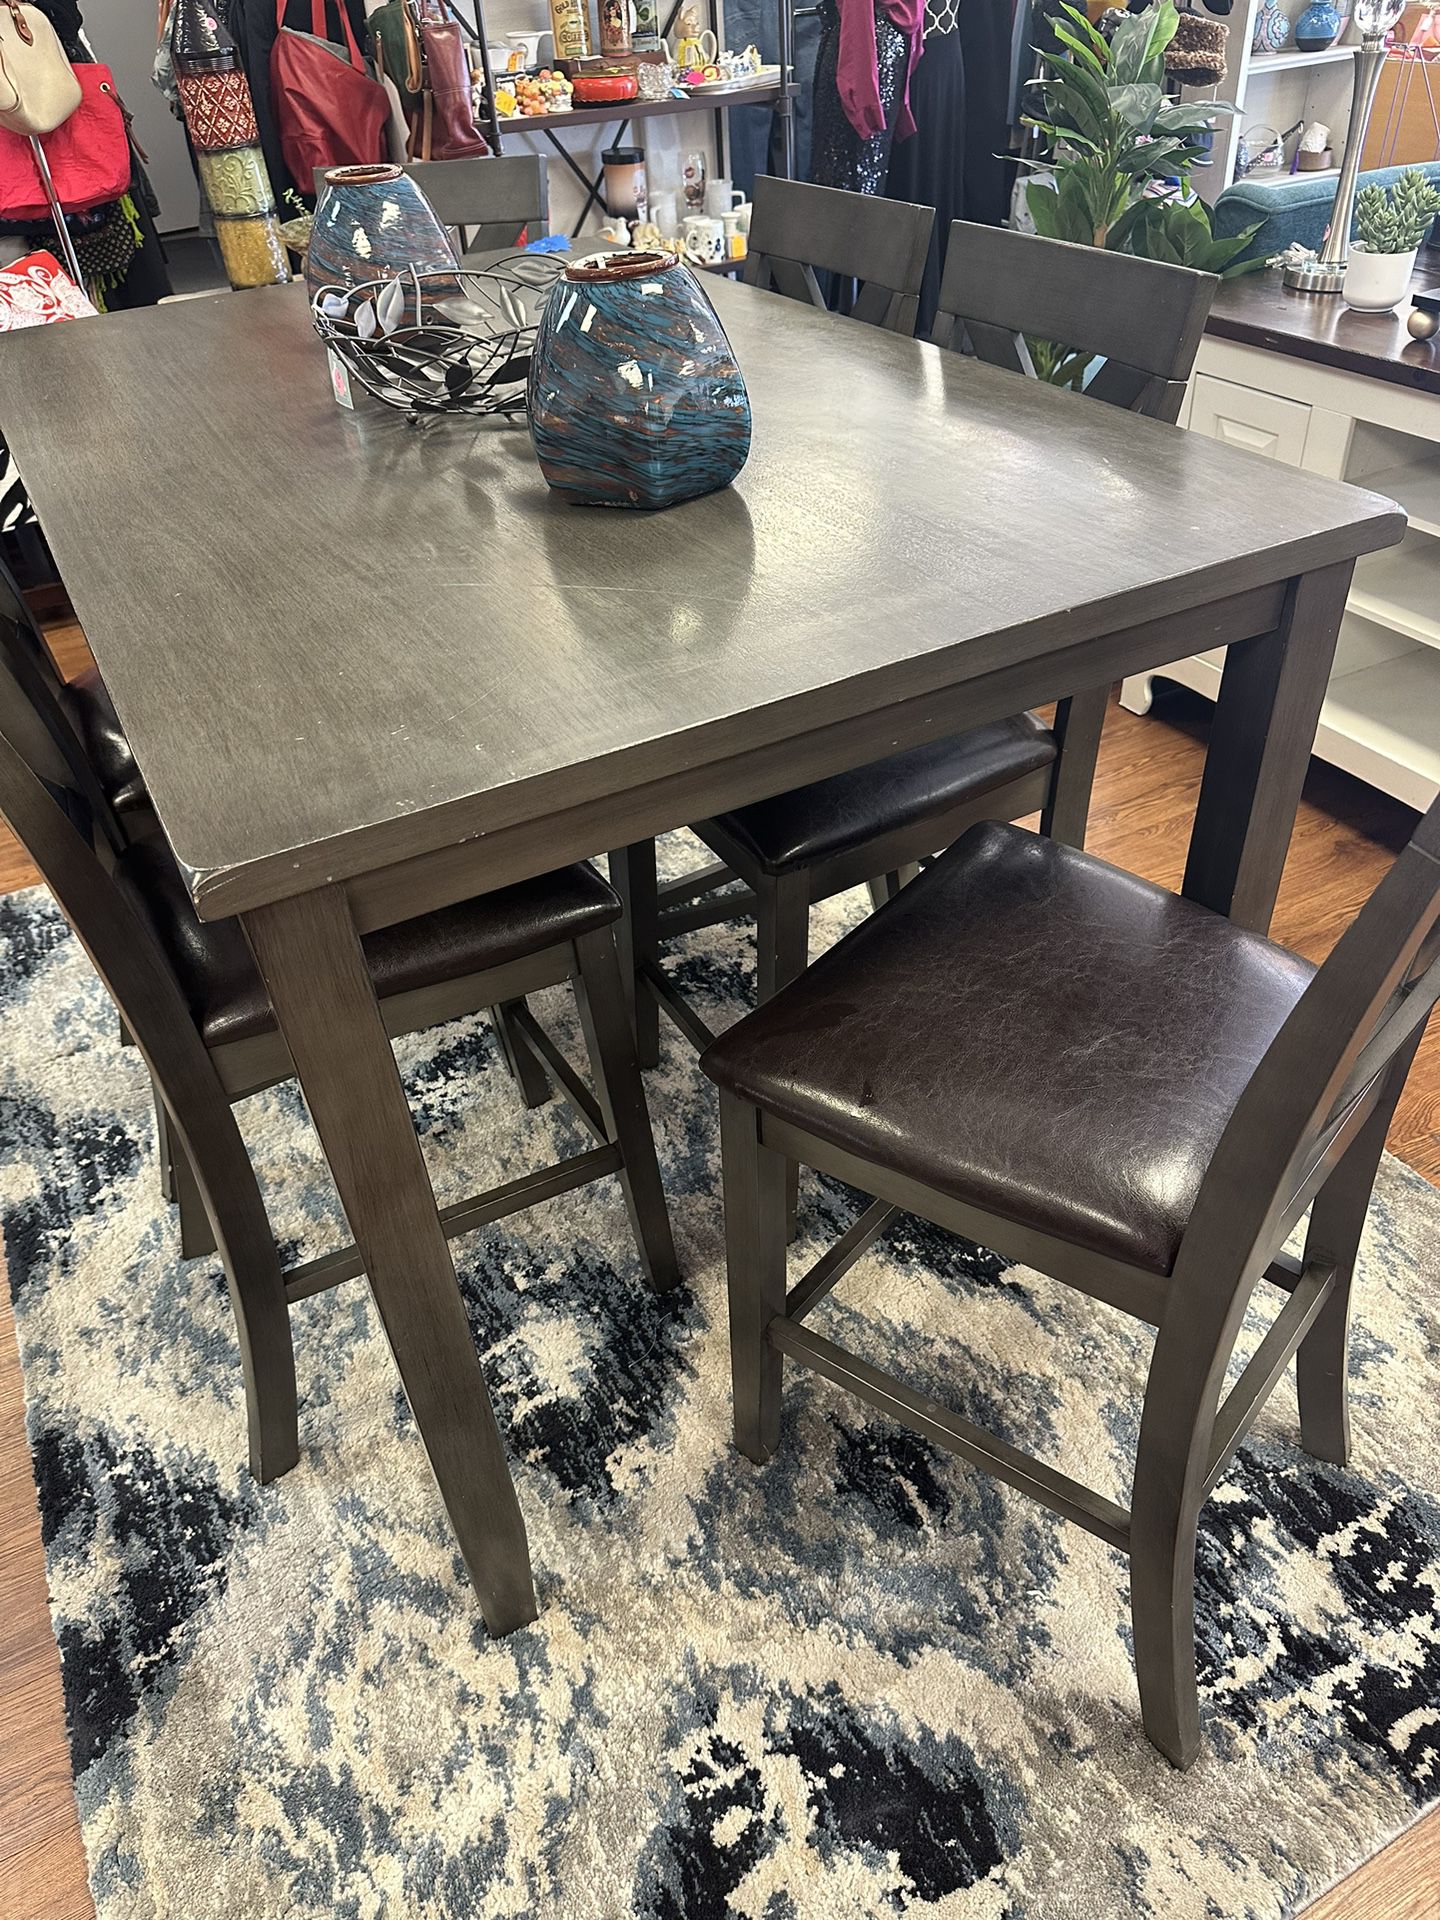 7 Piece Beautiful Gray Pub Table With 6 Chairs. Excellent Condition